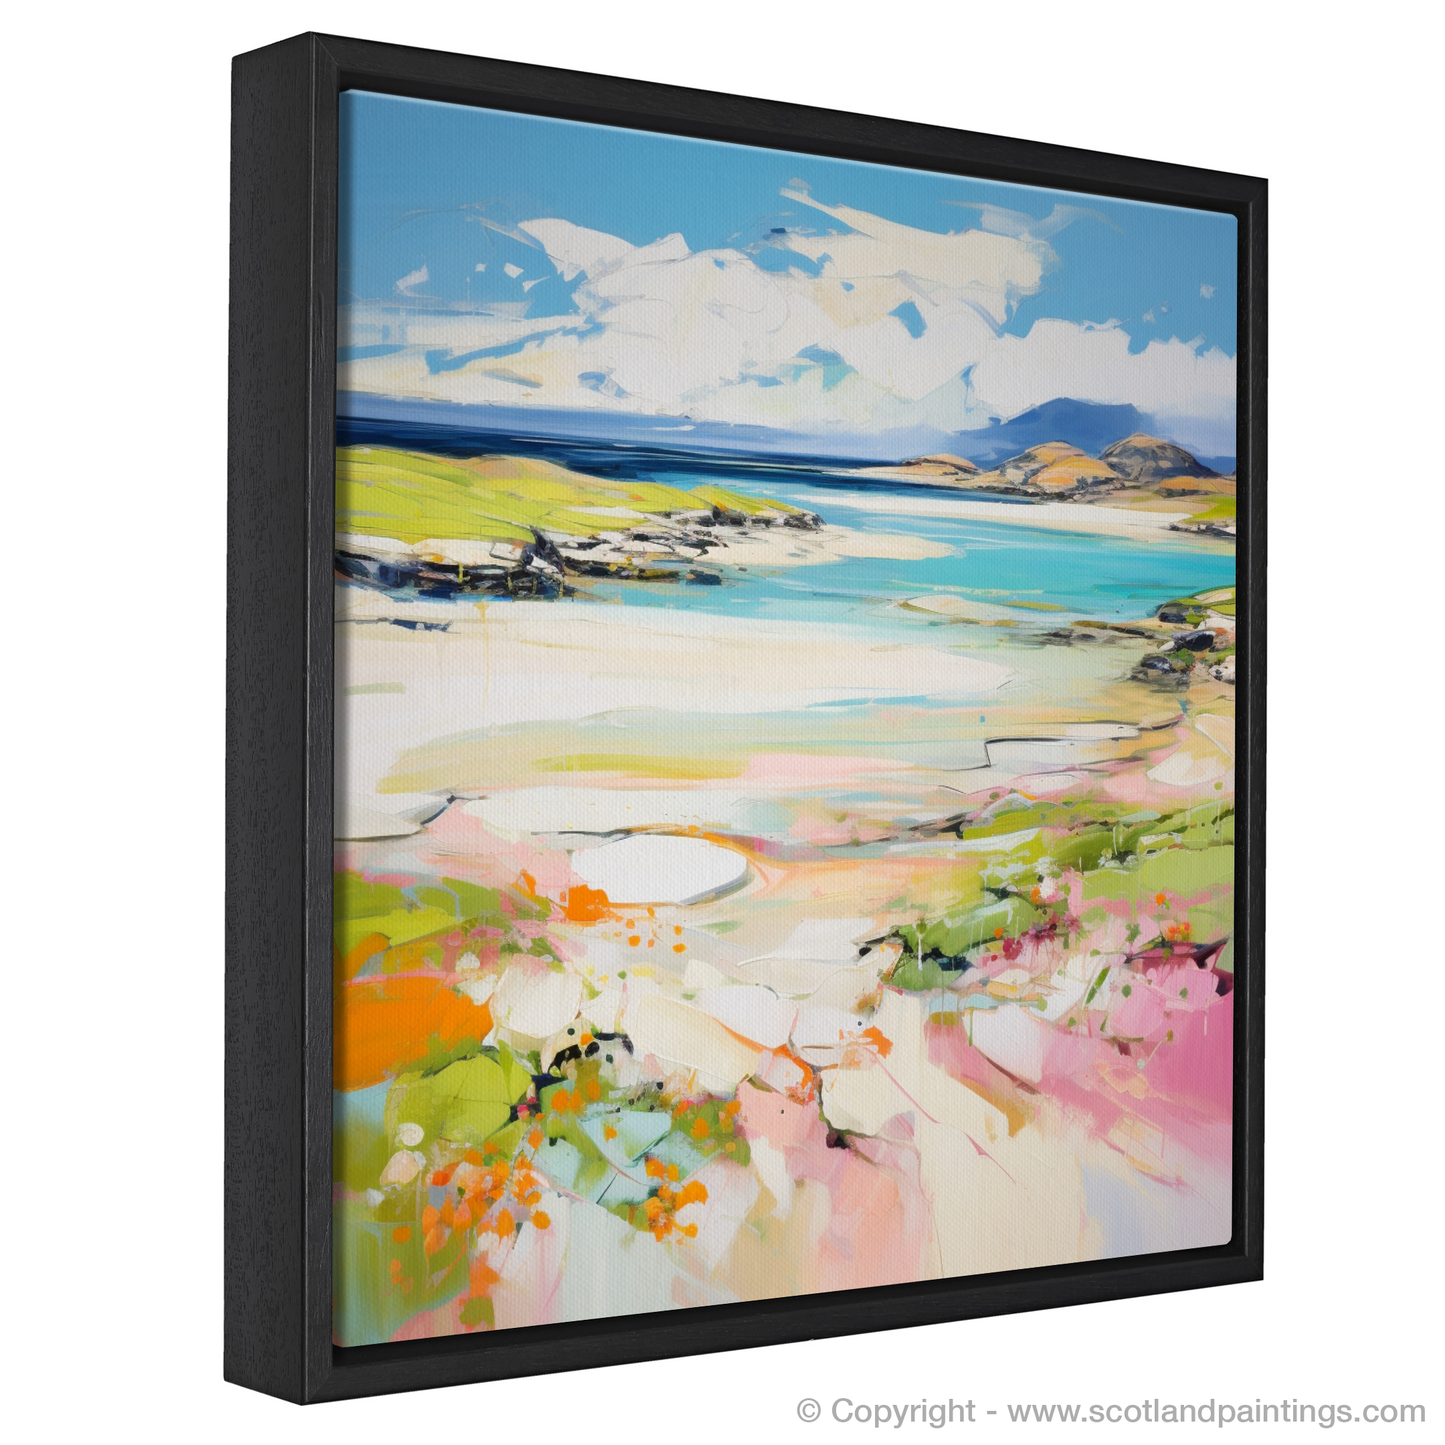 Painting and Art Print of Isle of Barra, Outer Hebrides in summer entitled "Summer Splendour of Isle of Barra".